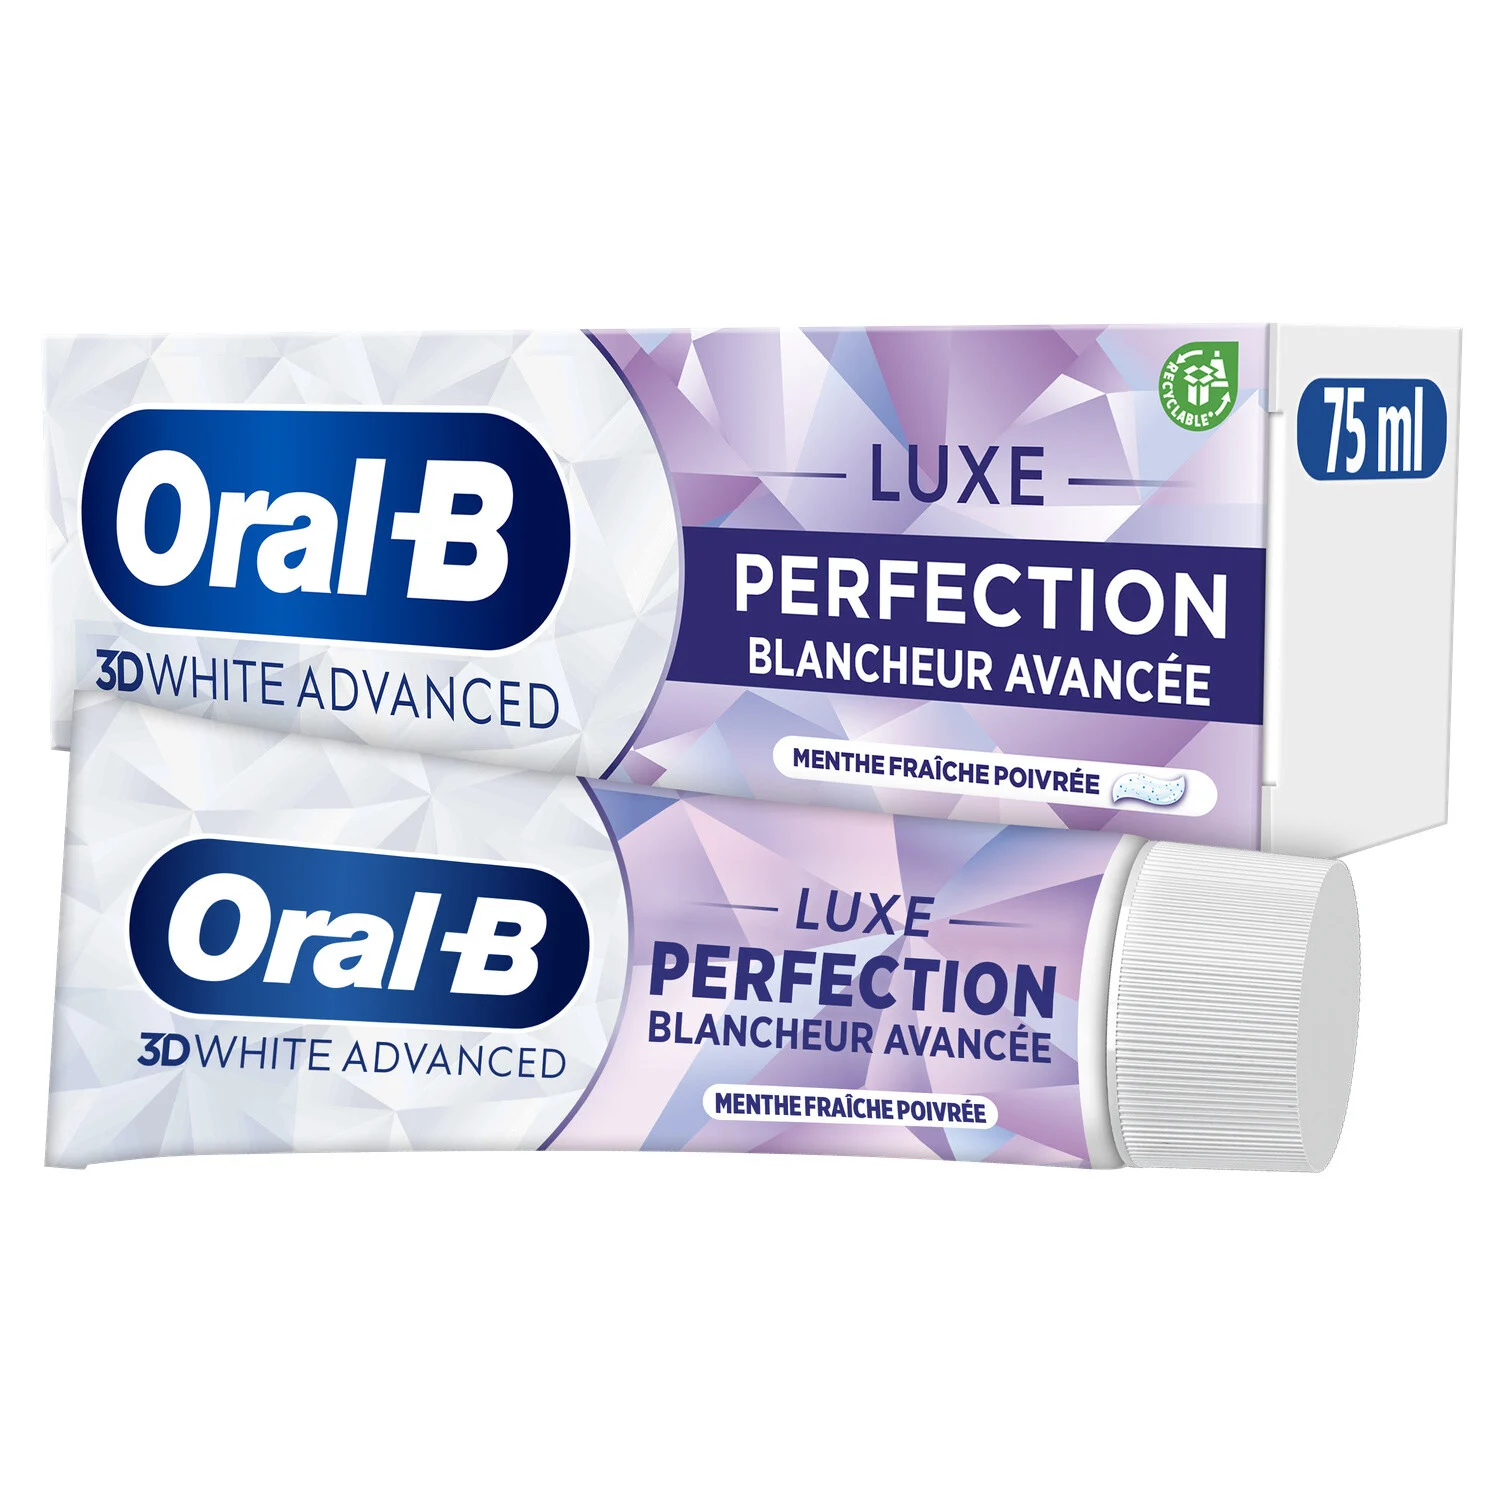 Dentifrice 3d White Advanced Luxe Perfection 75ml -oral-b